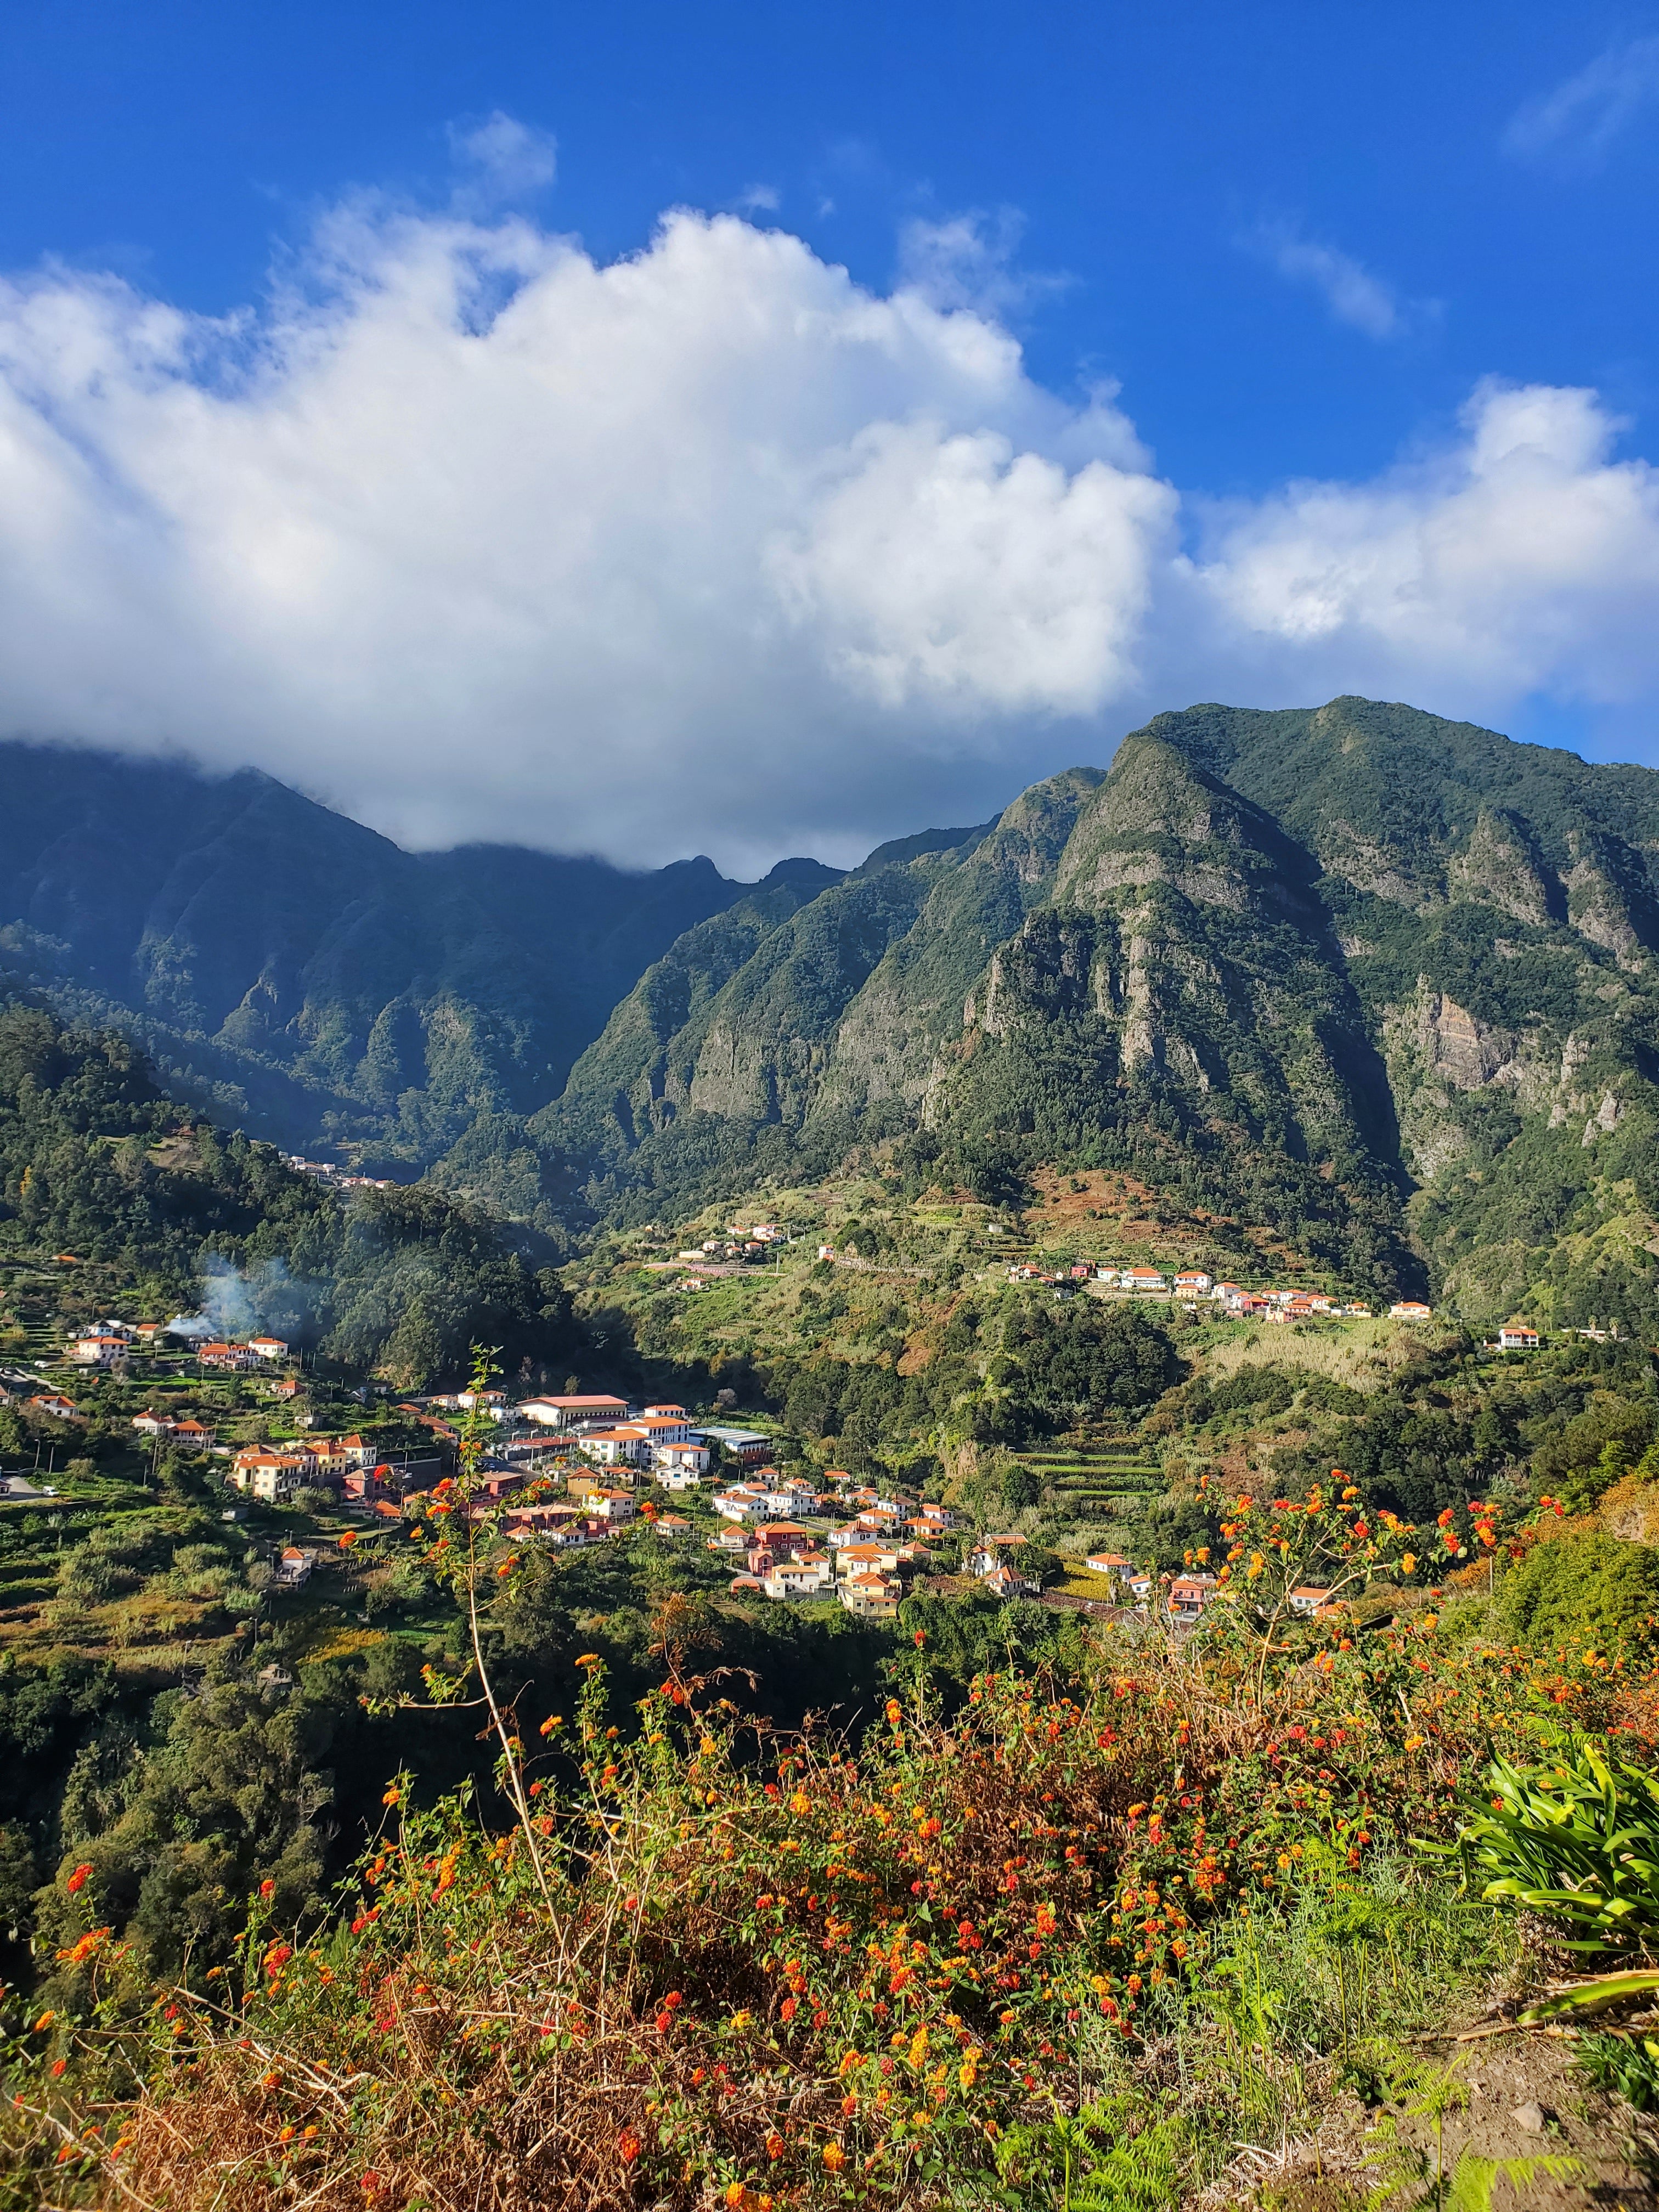 A photo of the mountains in Madeira